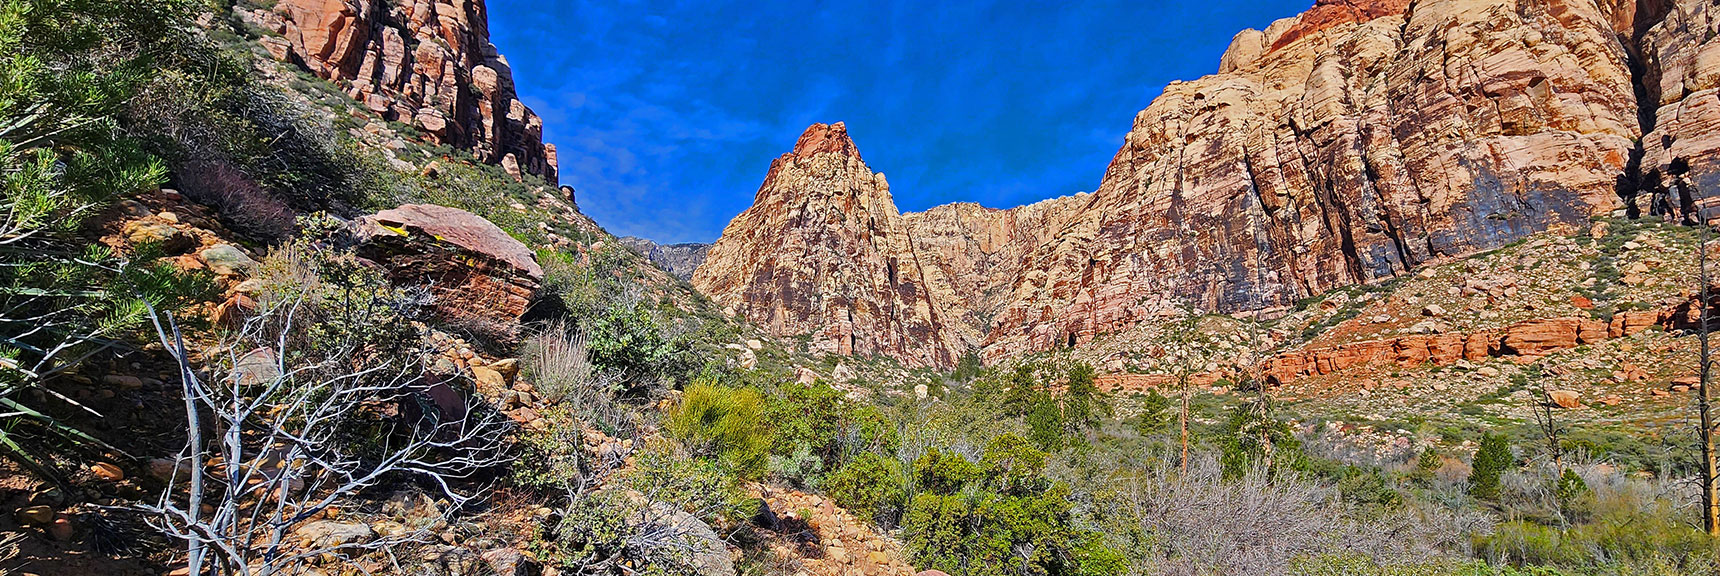 Mescalito Pyramid in Full View Upon Reaching Pine Creek Canyon Base | Knoll Trail | Red Rock Canyon National Conservation Area, Nevada | David Smith | LasVegasAreaTrails.com